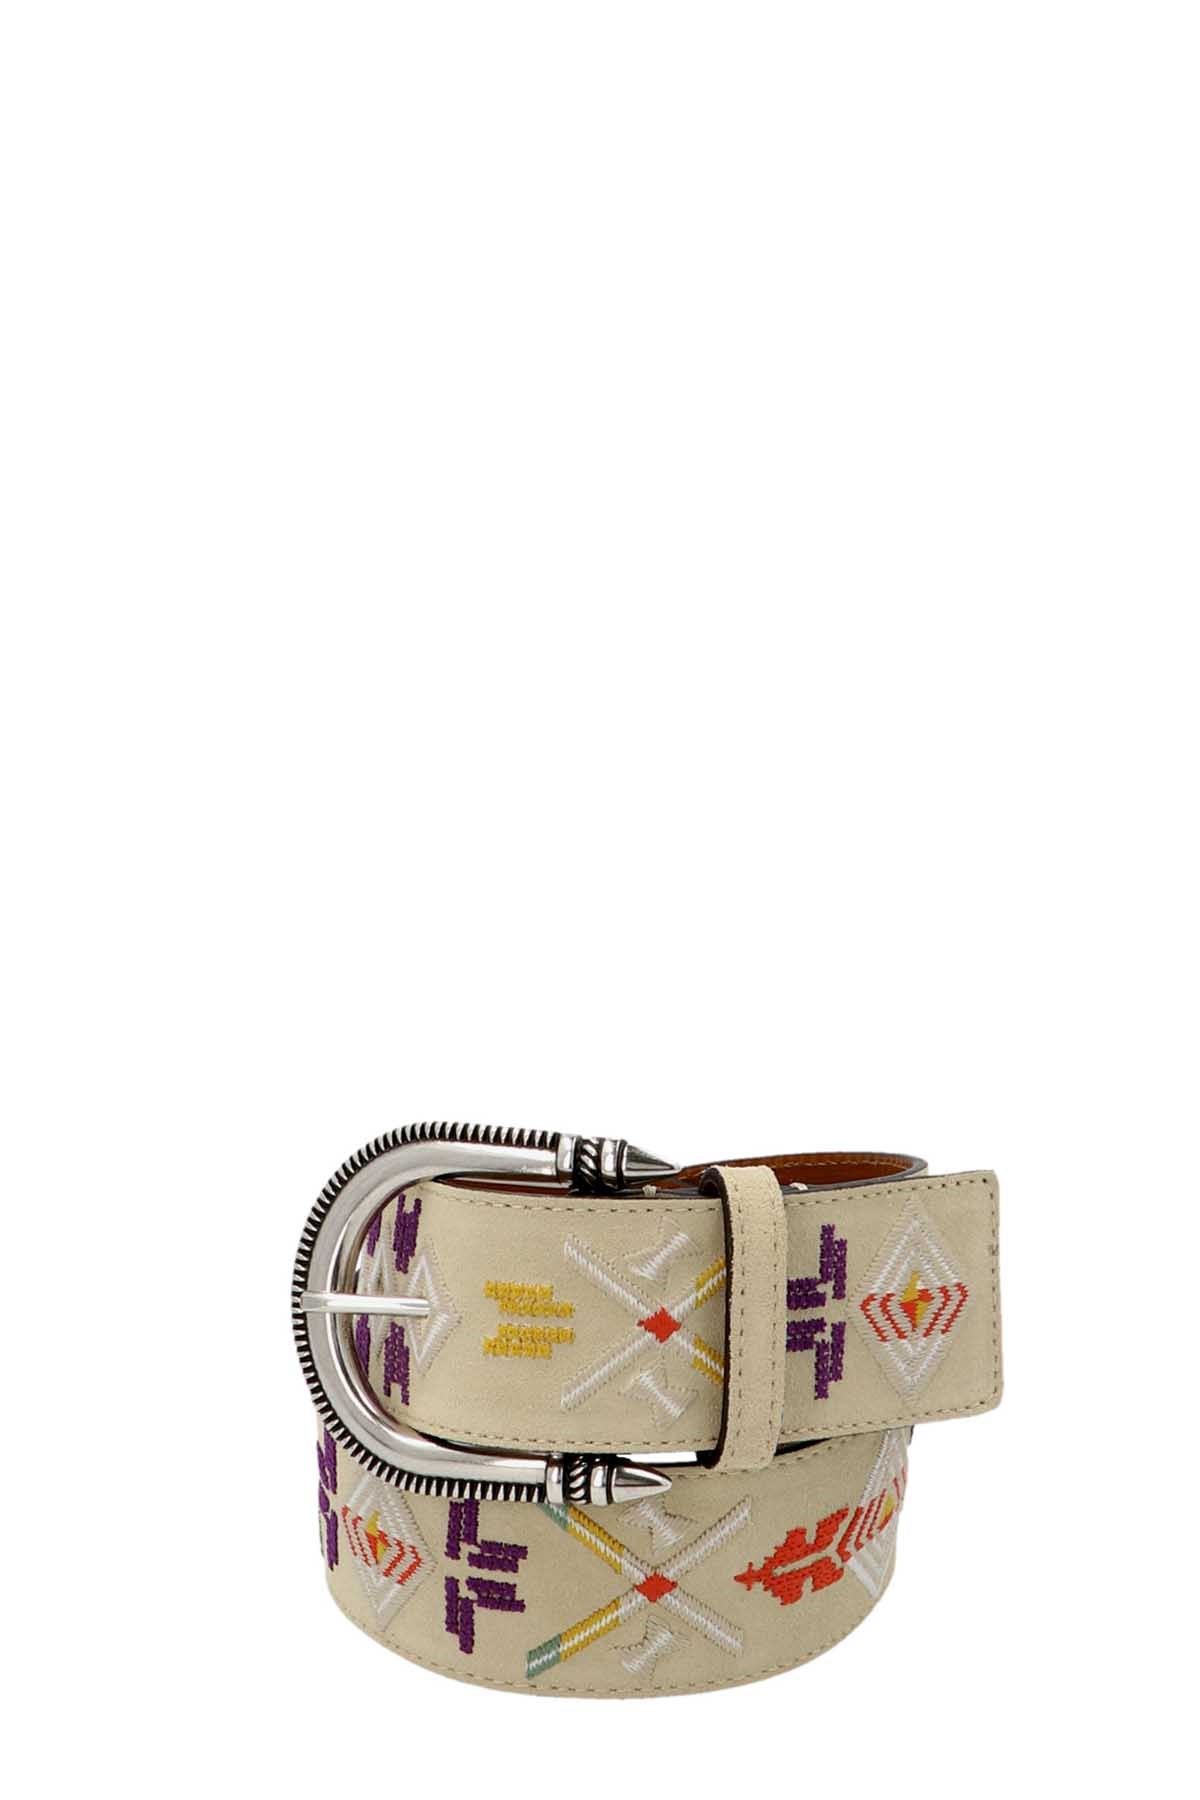 ETRO Contrast Embroidery Belt